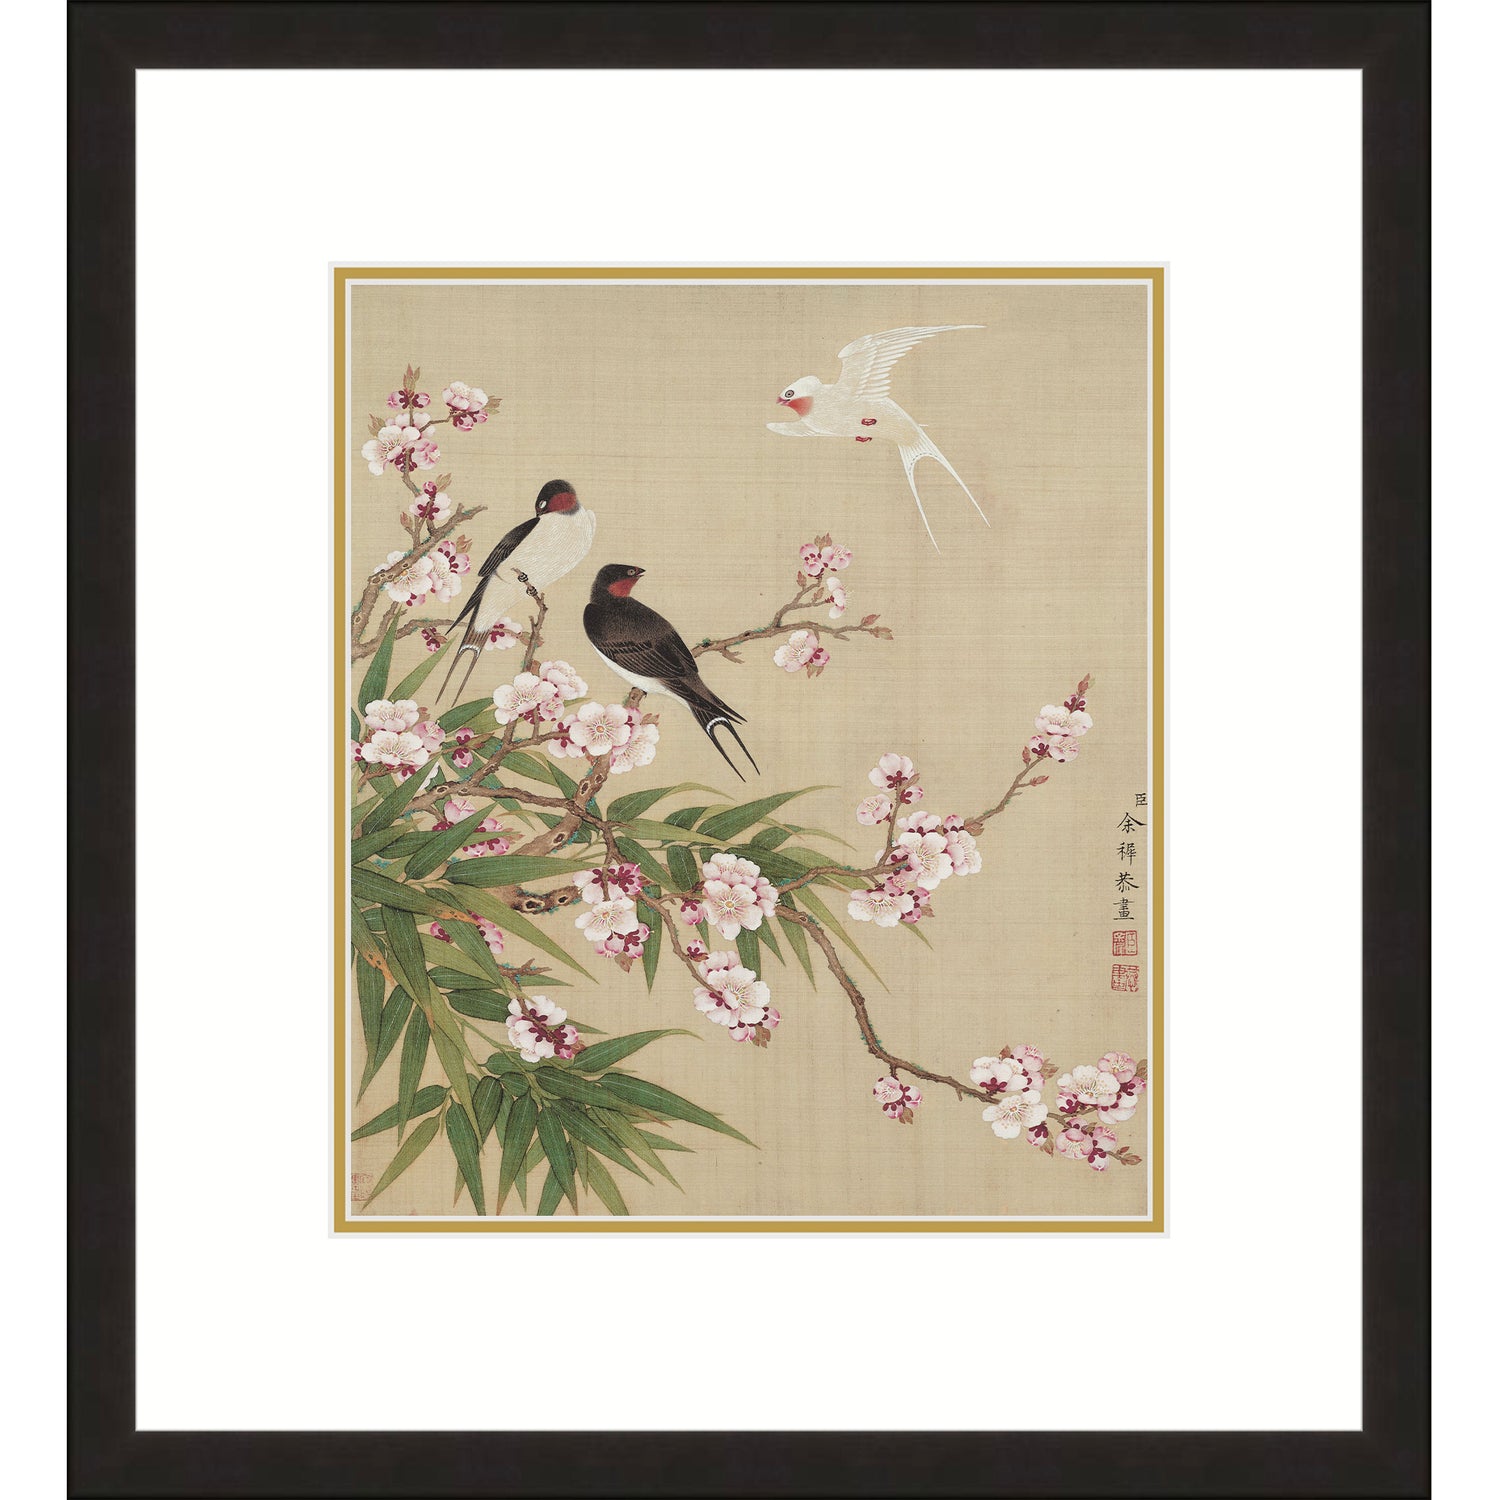 Swallows and Peach Blossoms